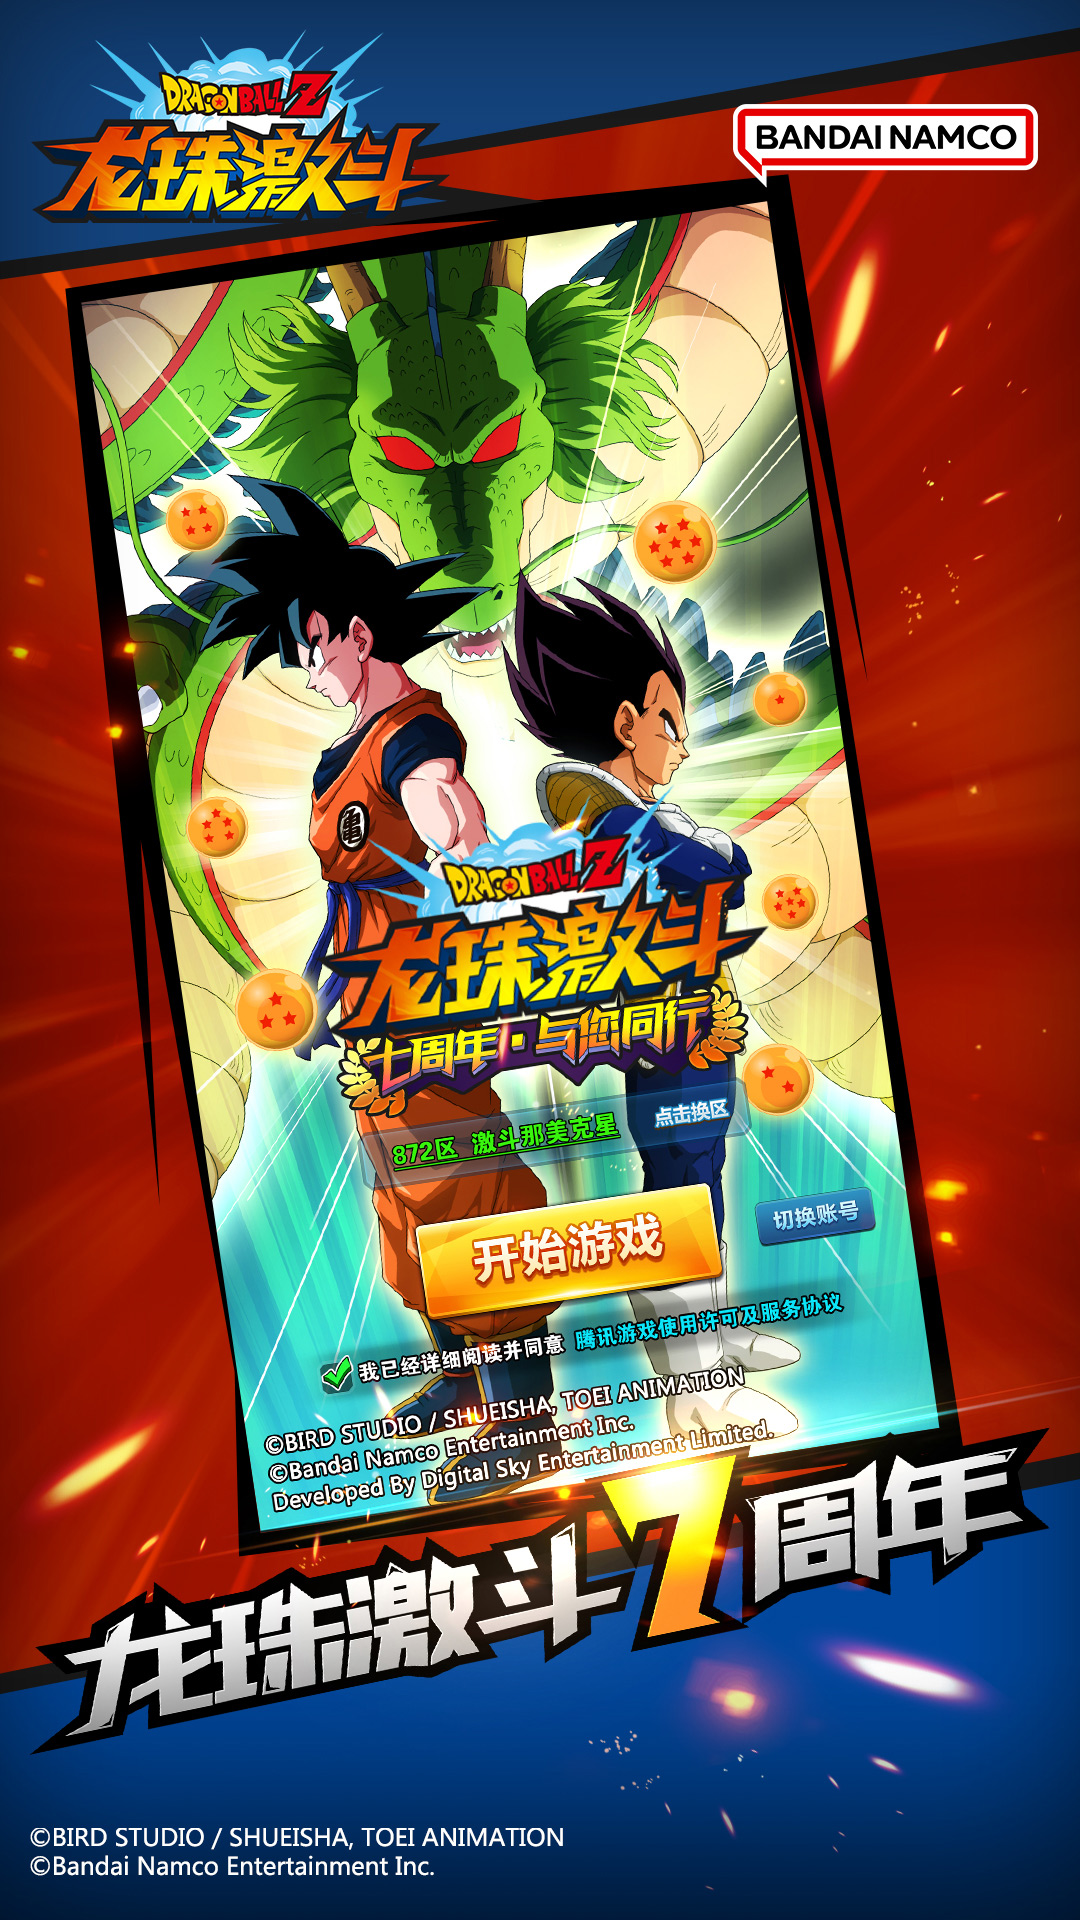  Download the game "Dragon Ball Fight" to rekindle the soul of blood